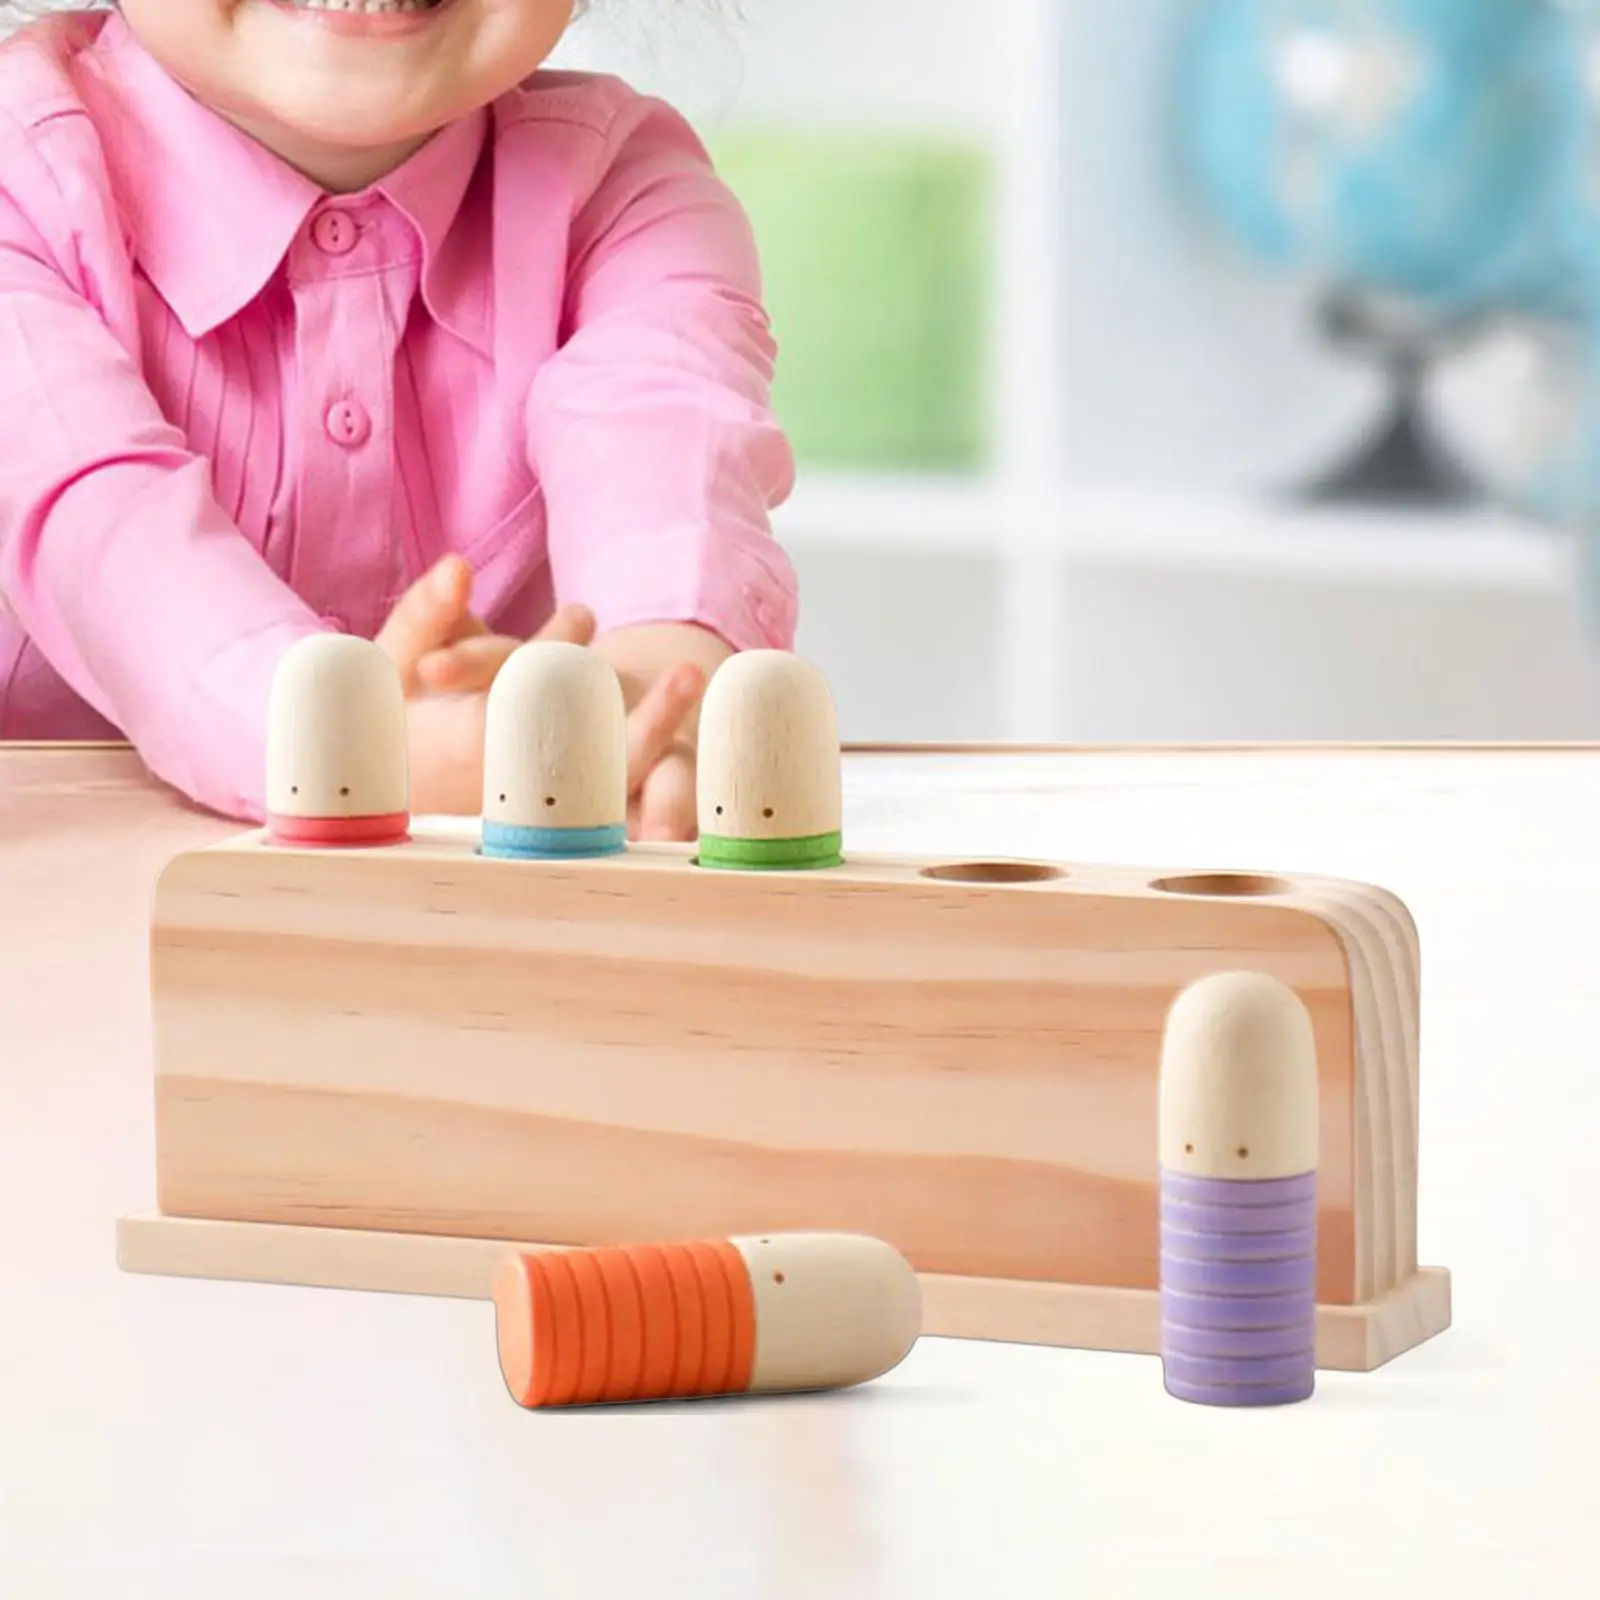 Wooden Rainbow Peg Dolls Shapes Sorting Toys, 5 Wood People Figures Cylinder Blocks for Kids Birthday Gifts